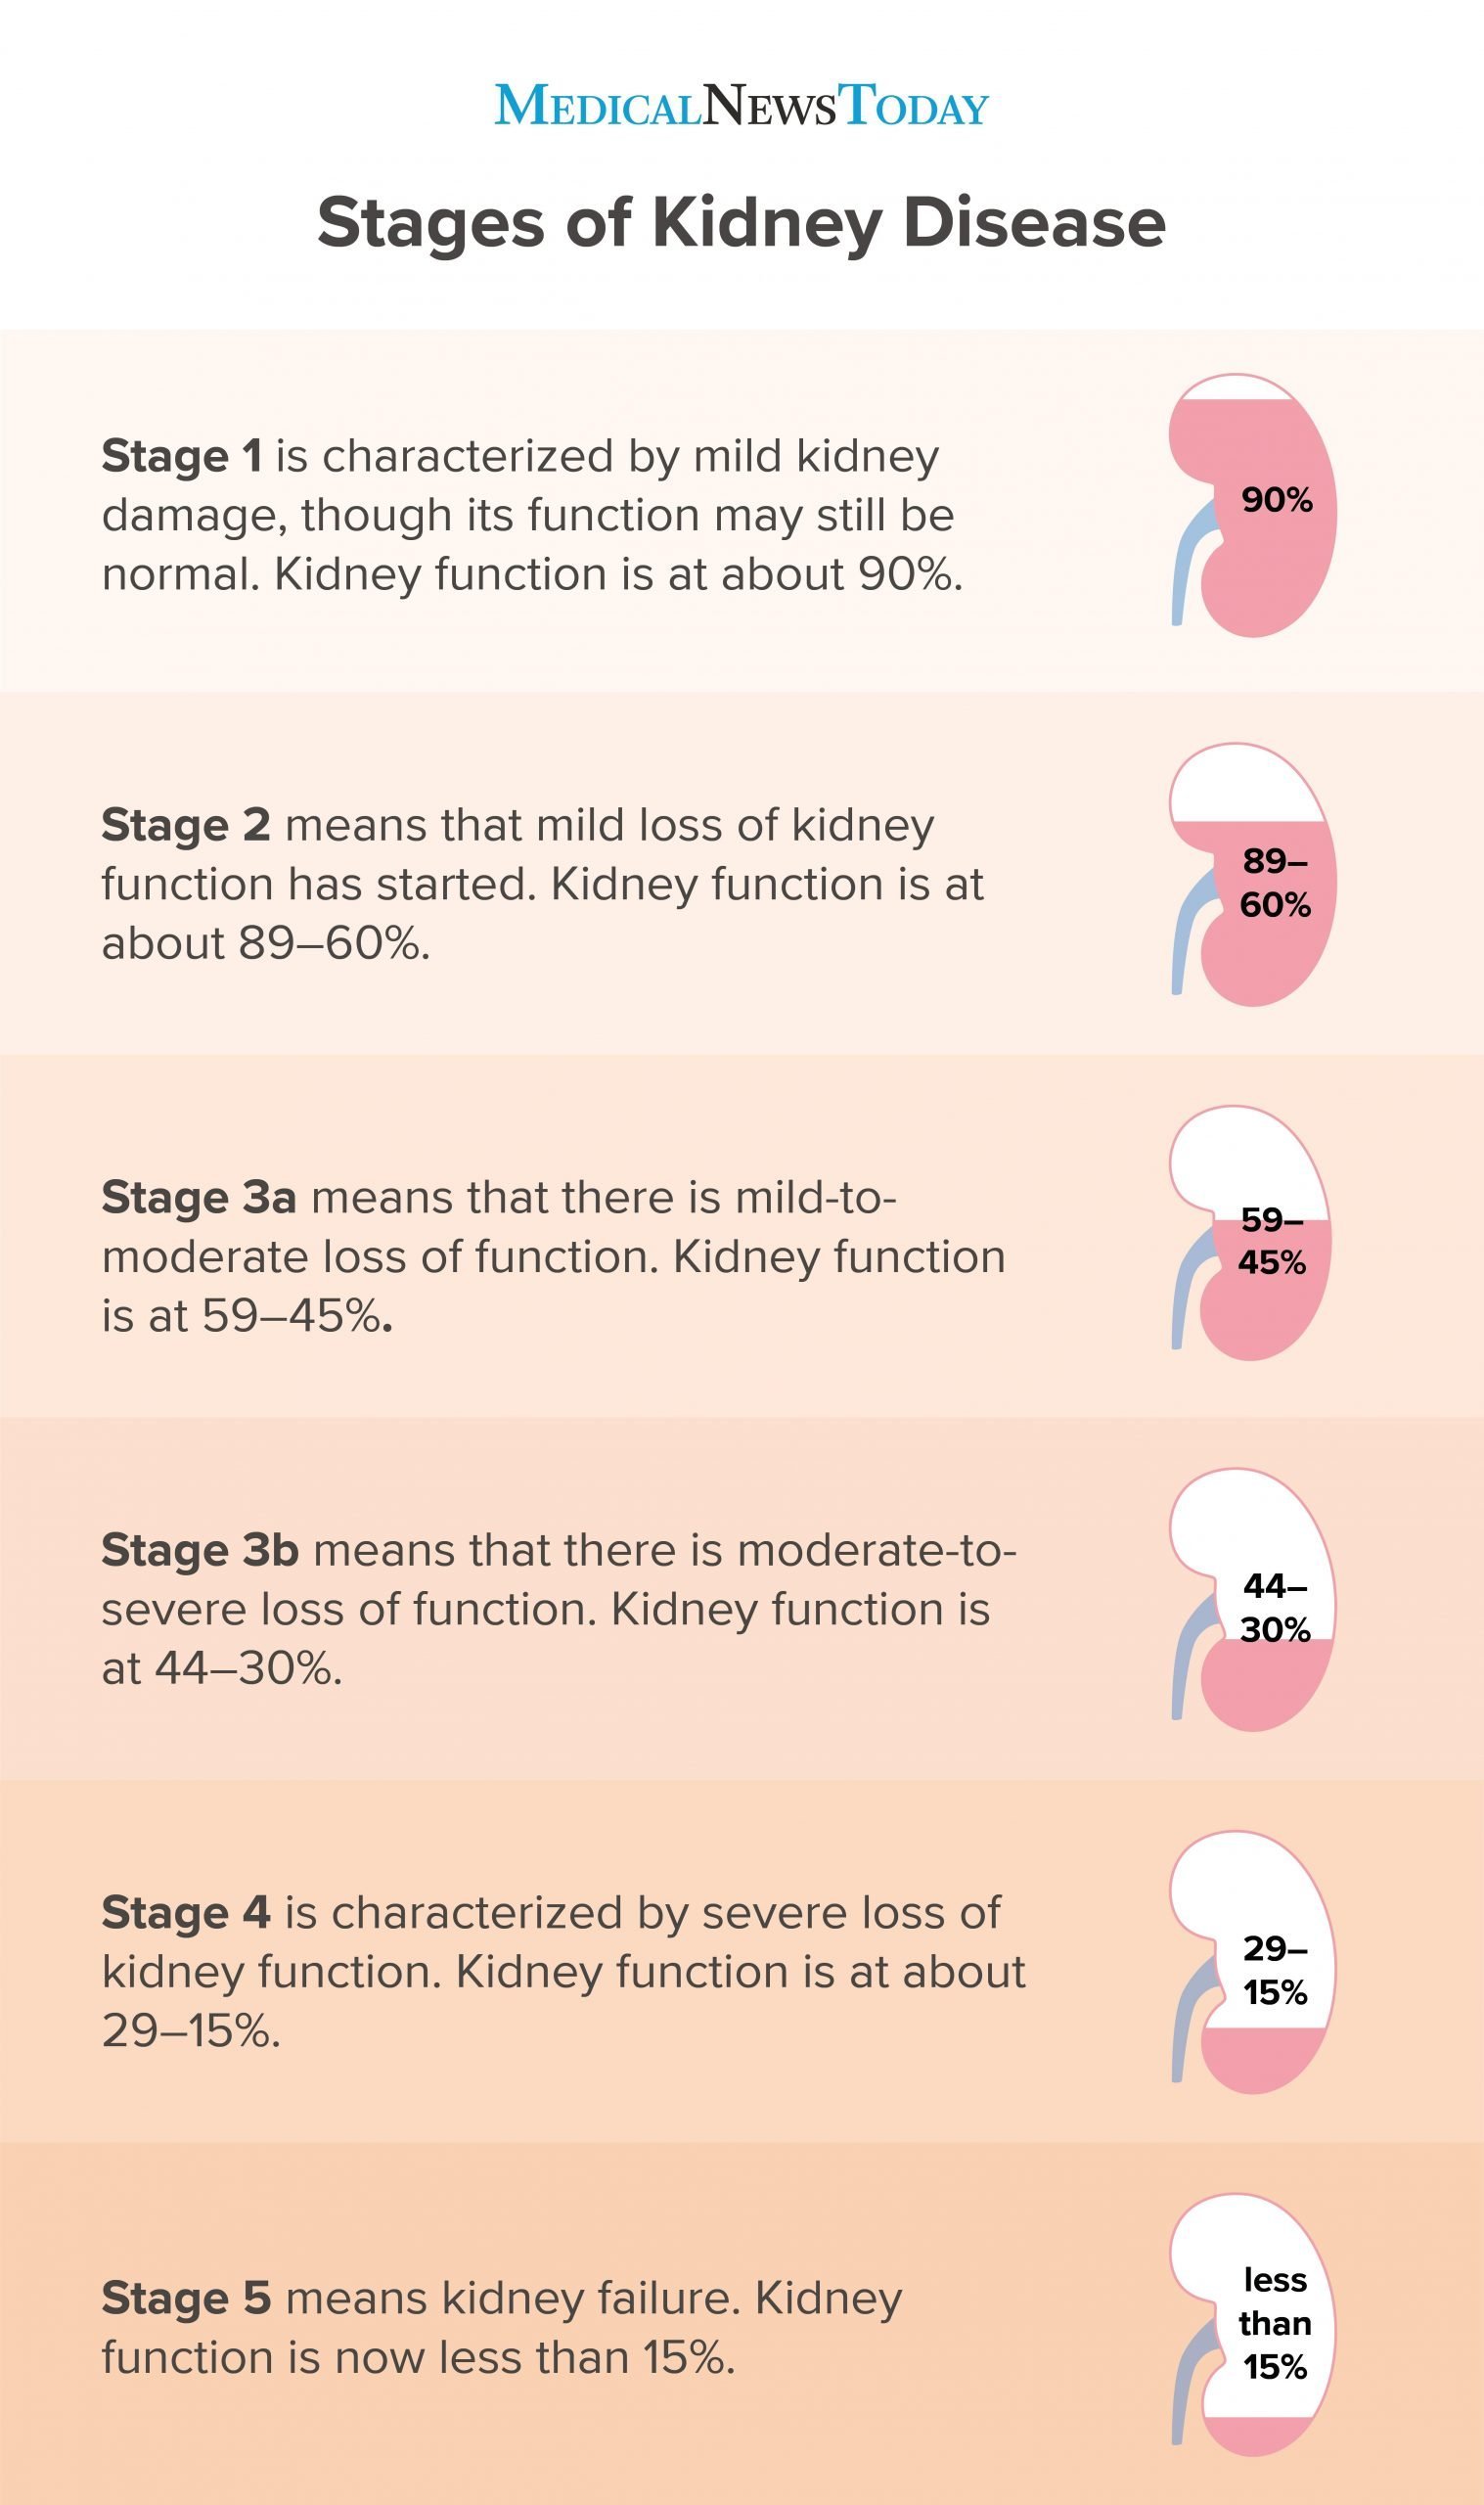 Kidney failure: Types, symptoms, causes, and treatment